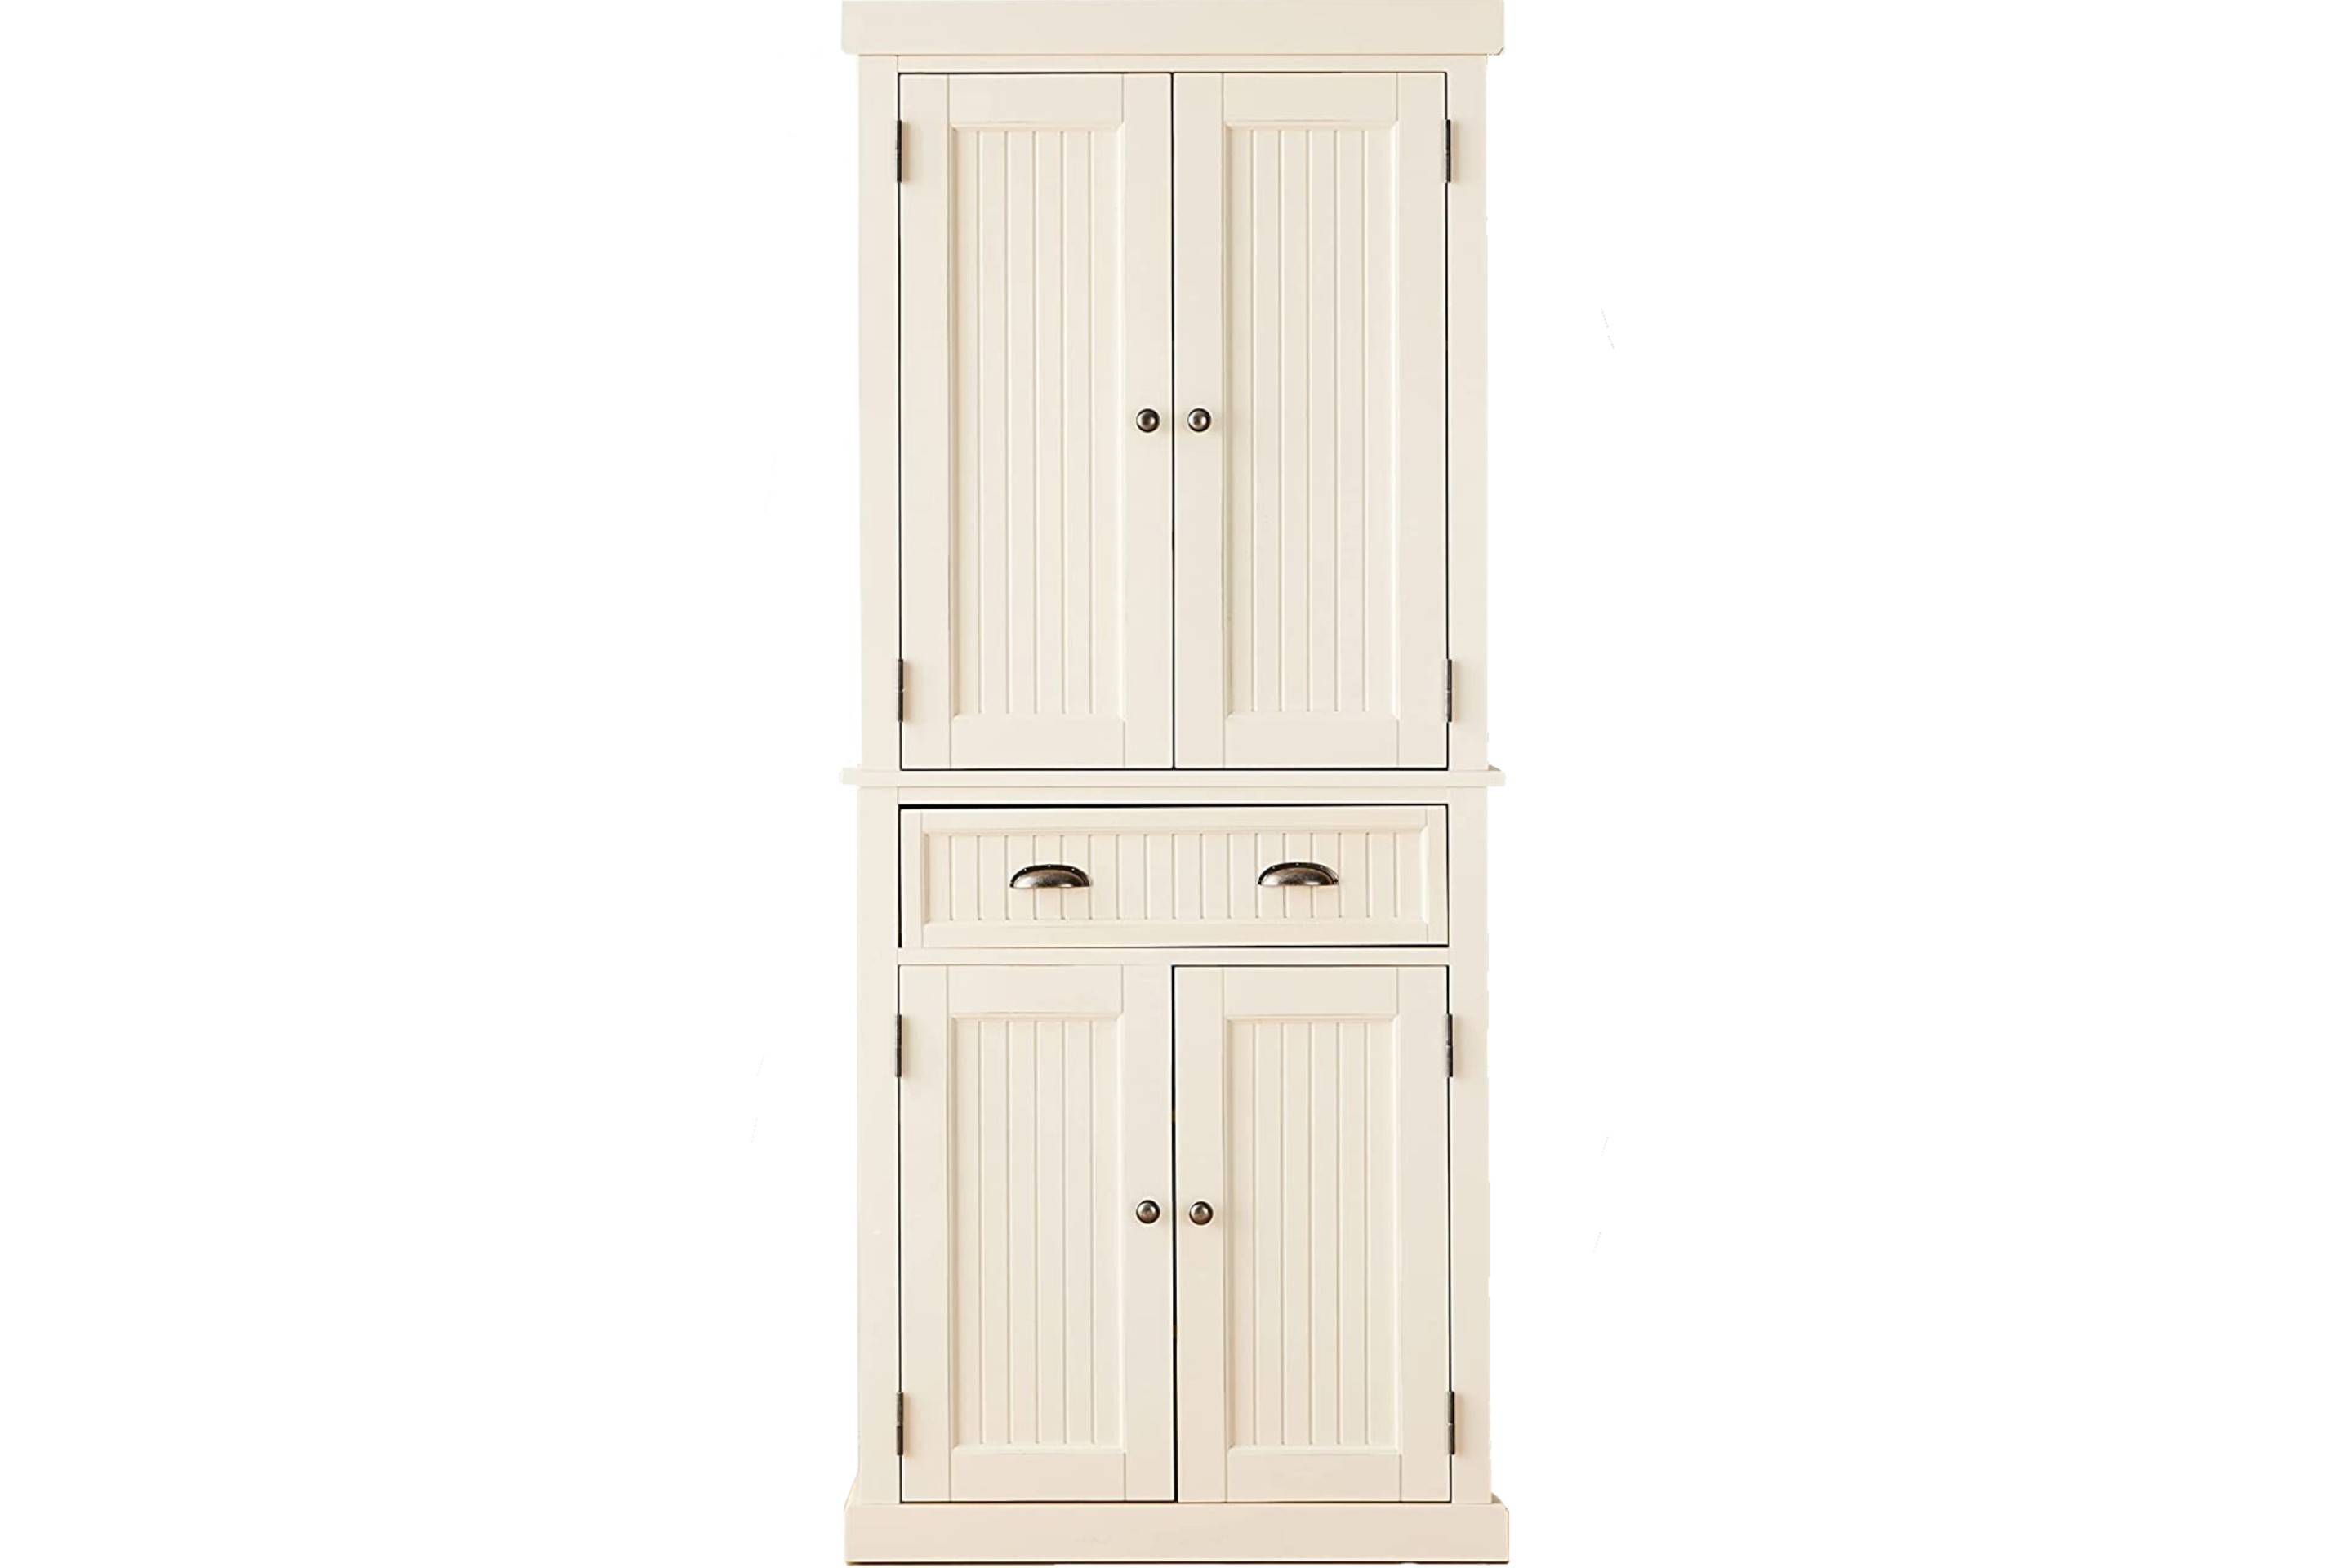 Homestyles Nantucket Off-White Pantry